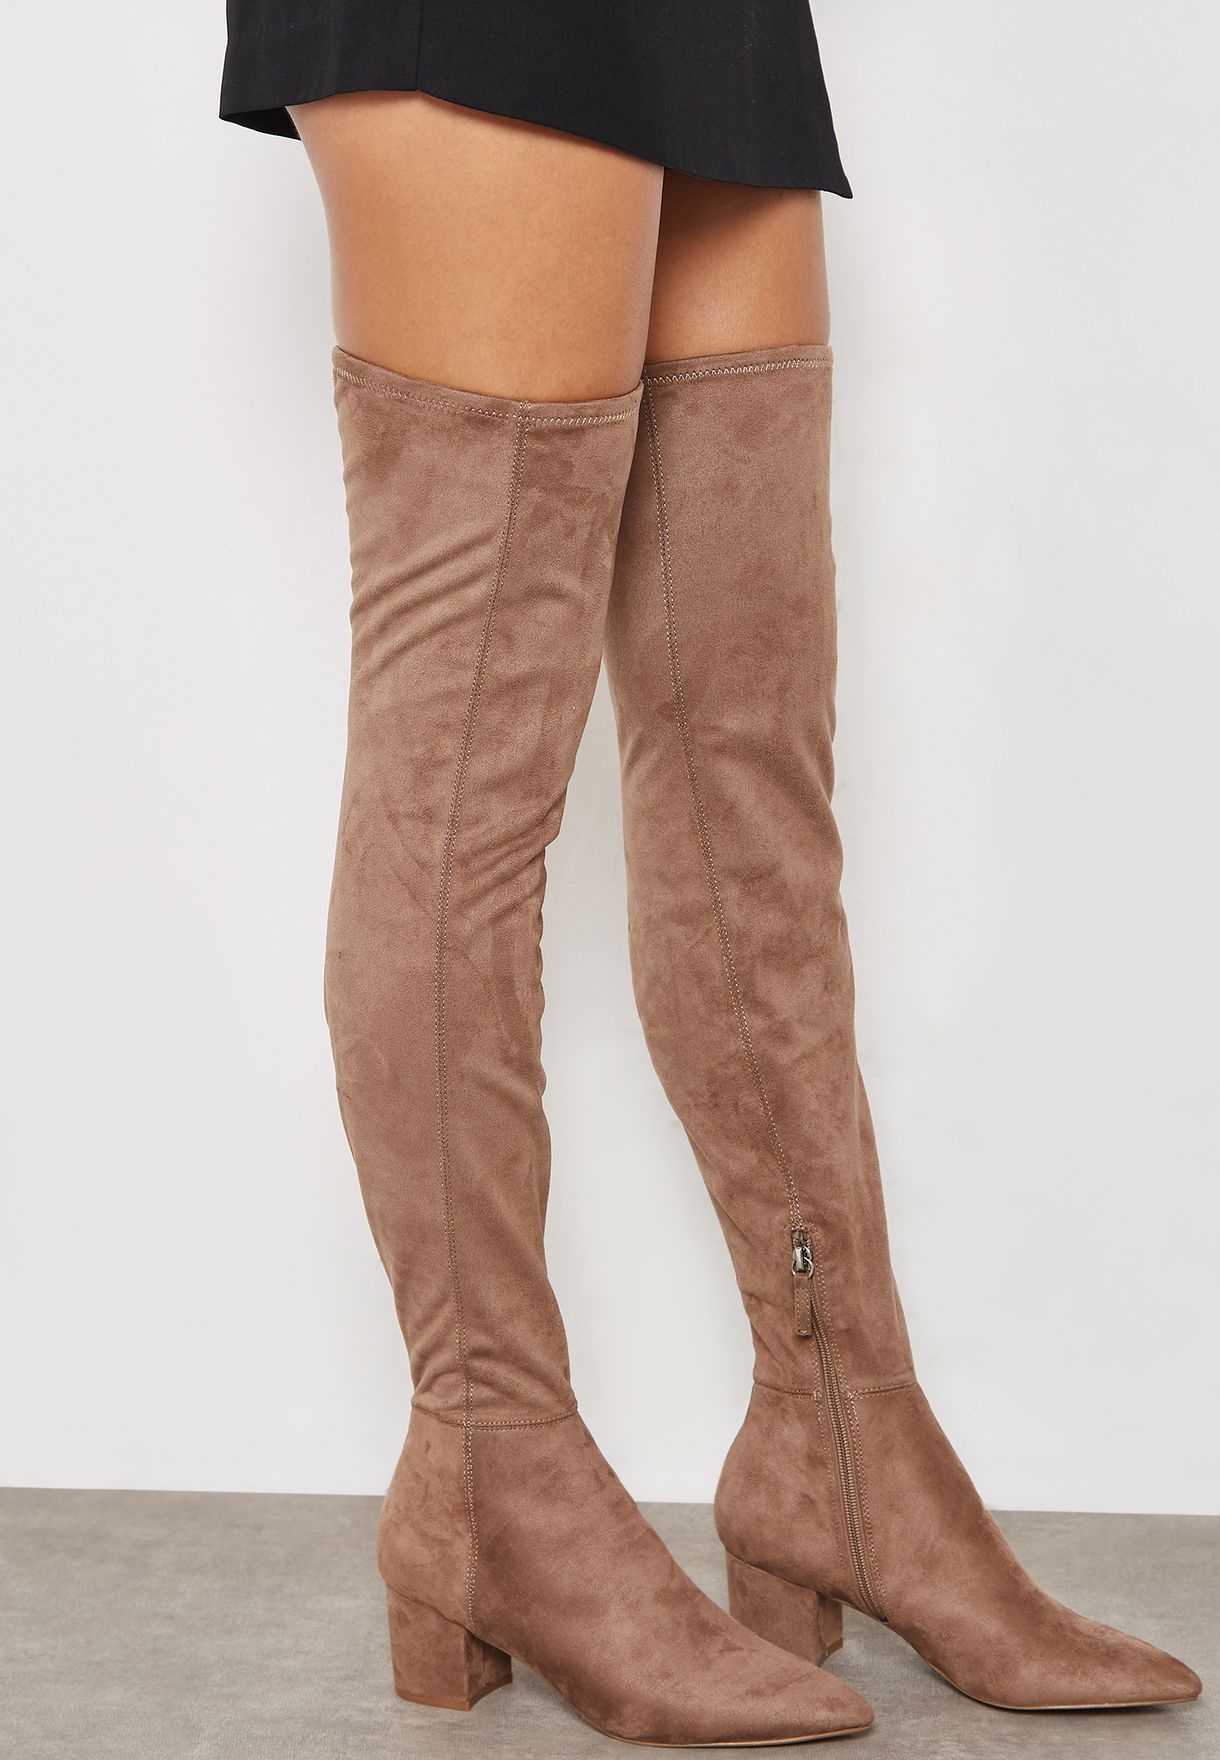 steve madden tan over the knee boots